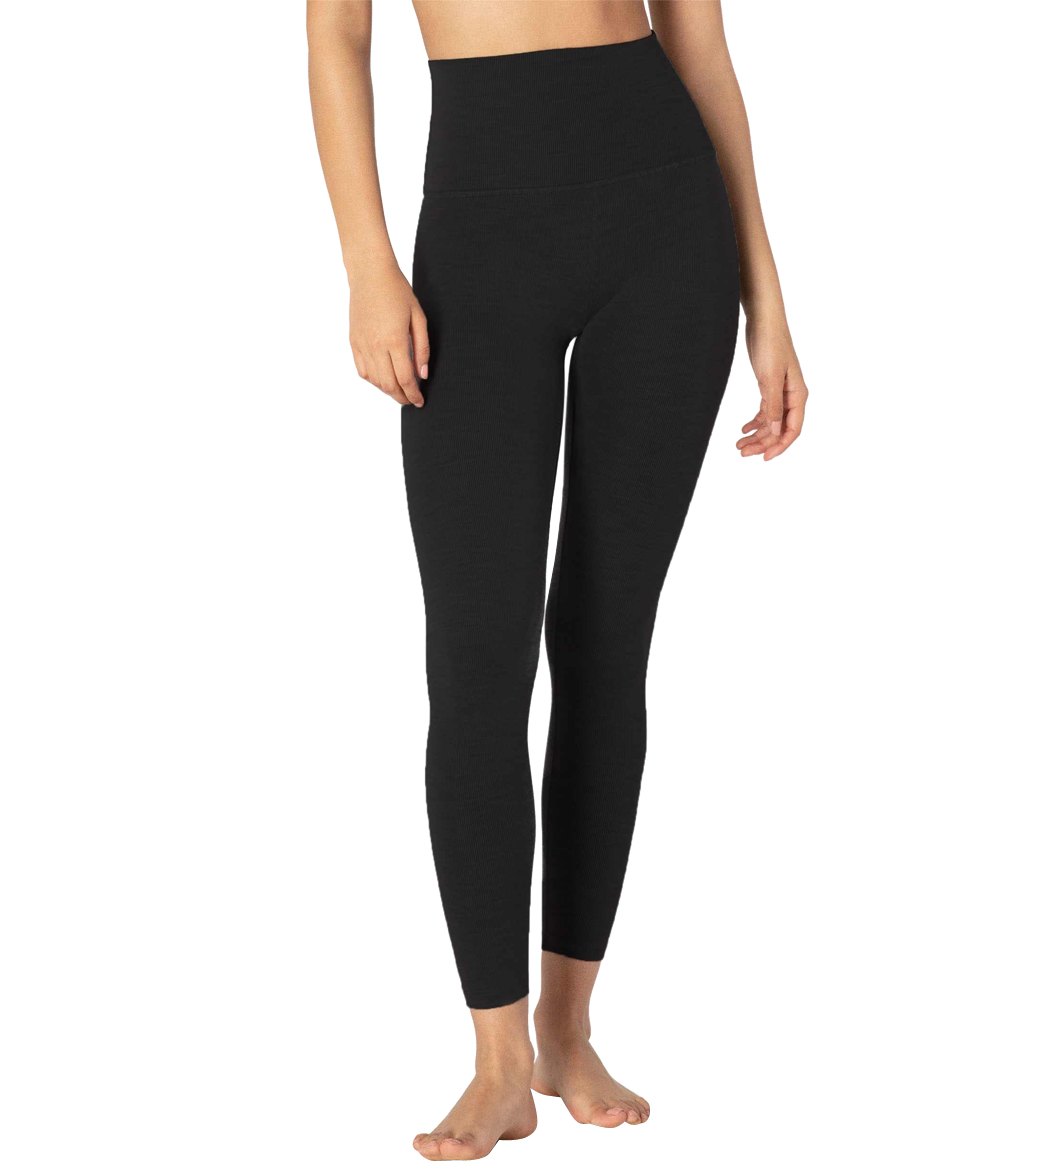 Women's Heather Supplex Workout Tights - Yoga and Running Leggings